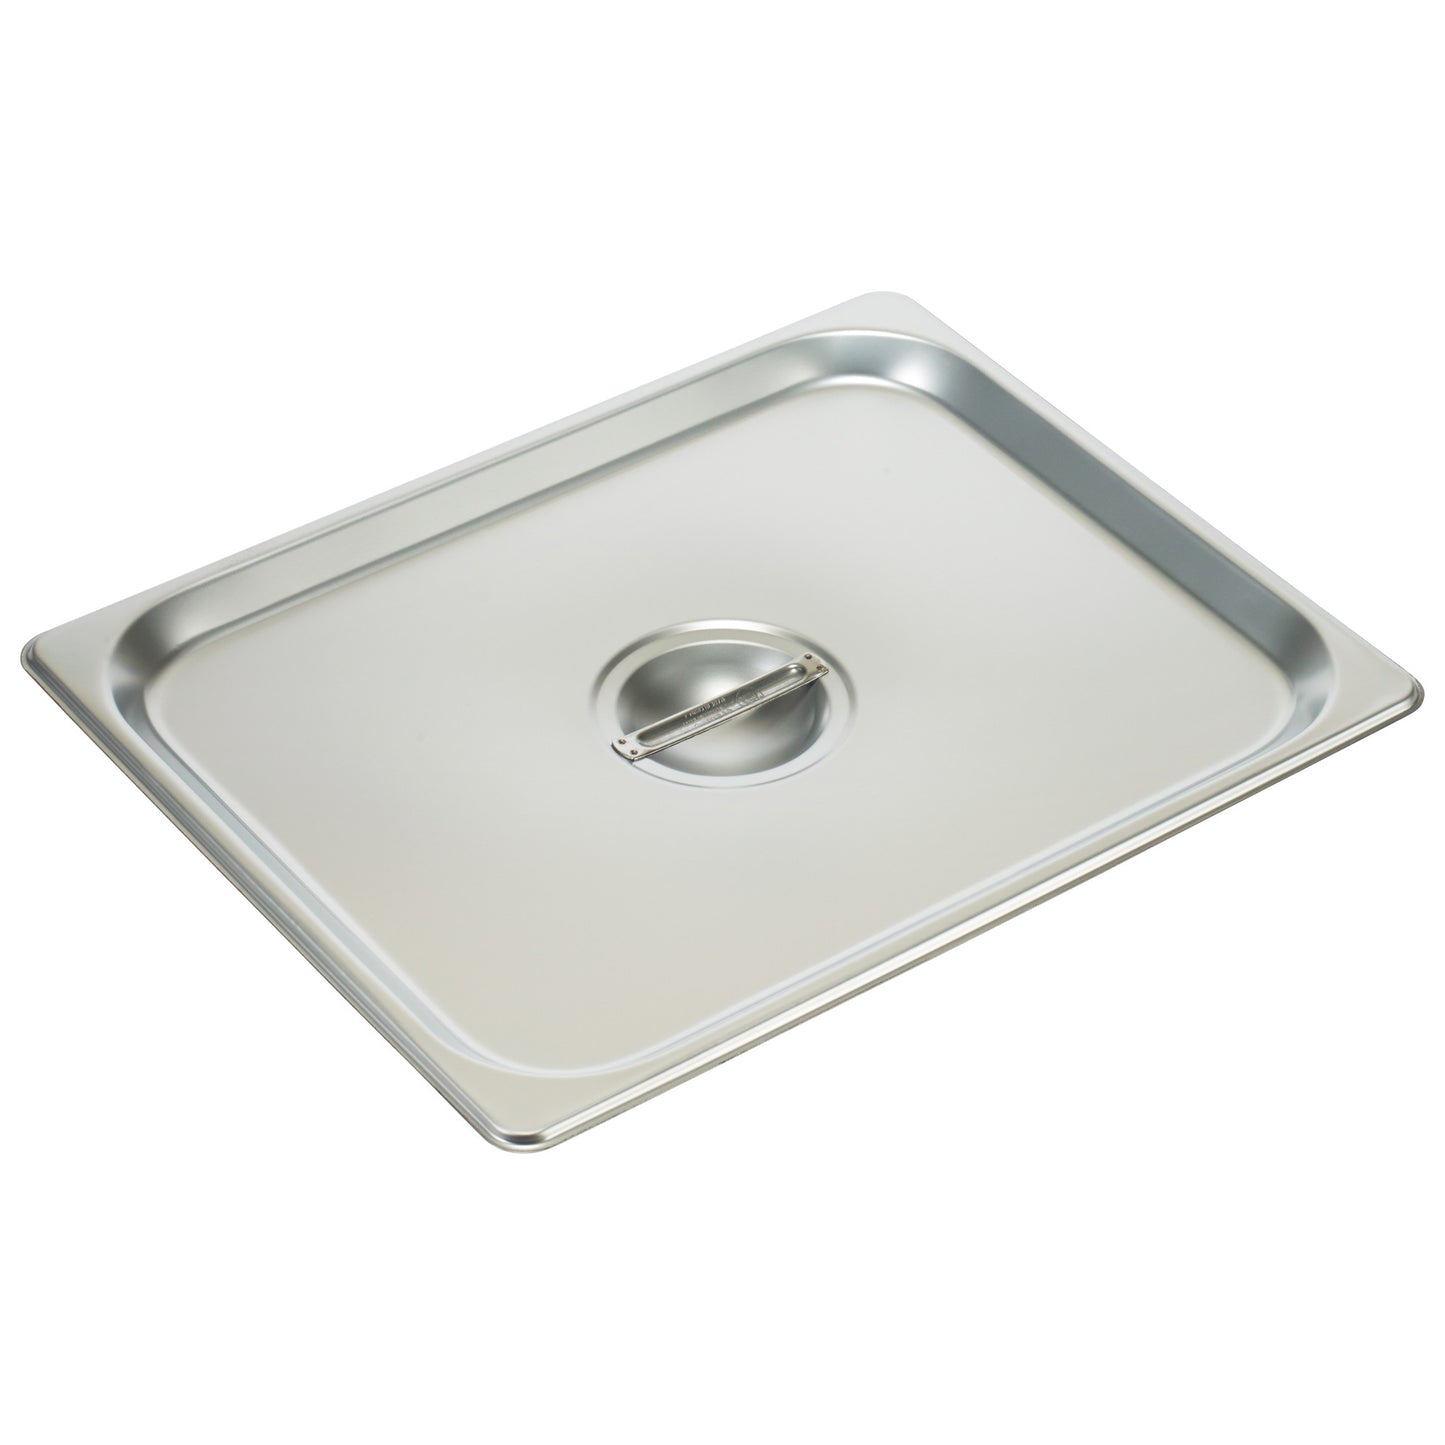 18/8 Stainless Steel Steam Pan Cover, Solid - Half (1/2)